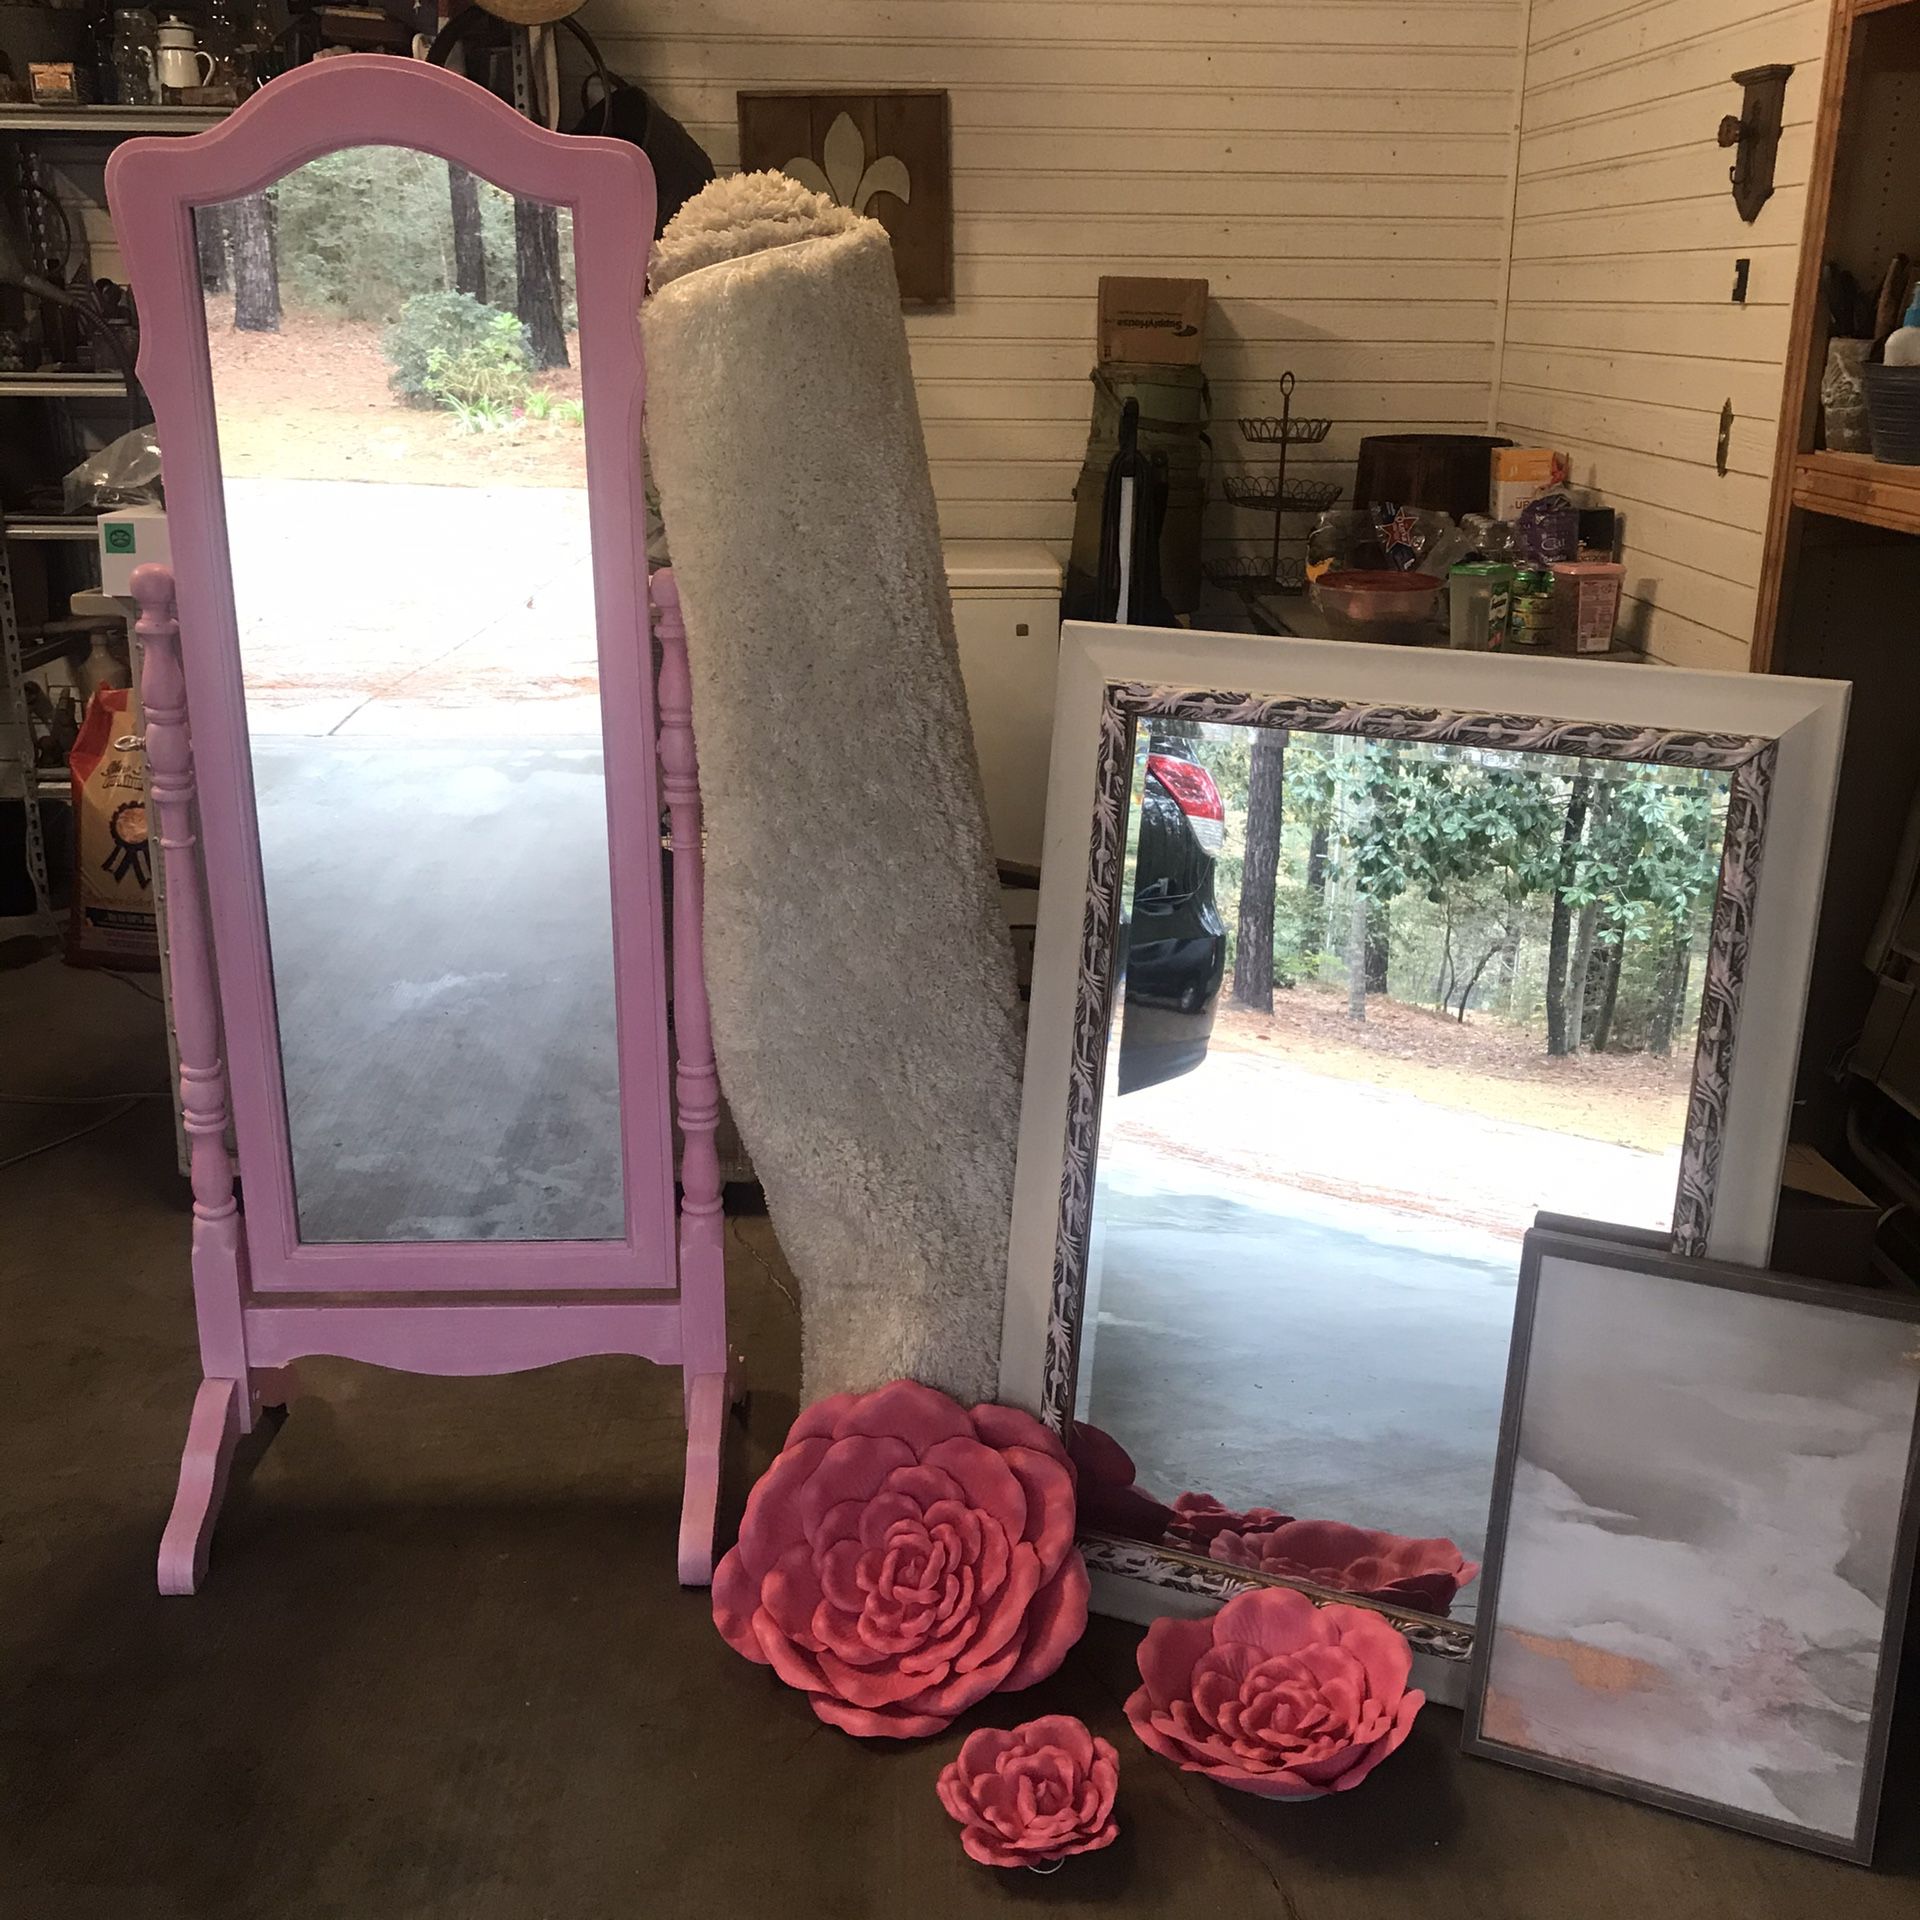 Full Length Mirror, Wall Mirror, Picture, Wall Flowers 4x6’ Ivory Rug, All For One Price Or Sold Separately See Description $100